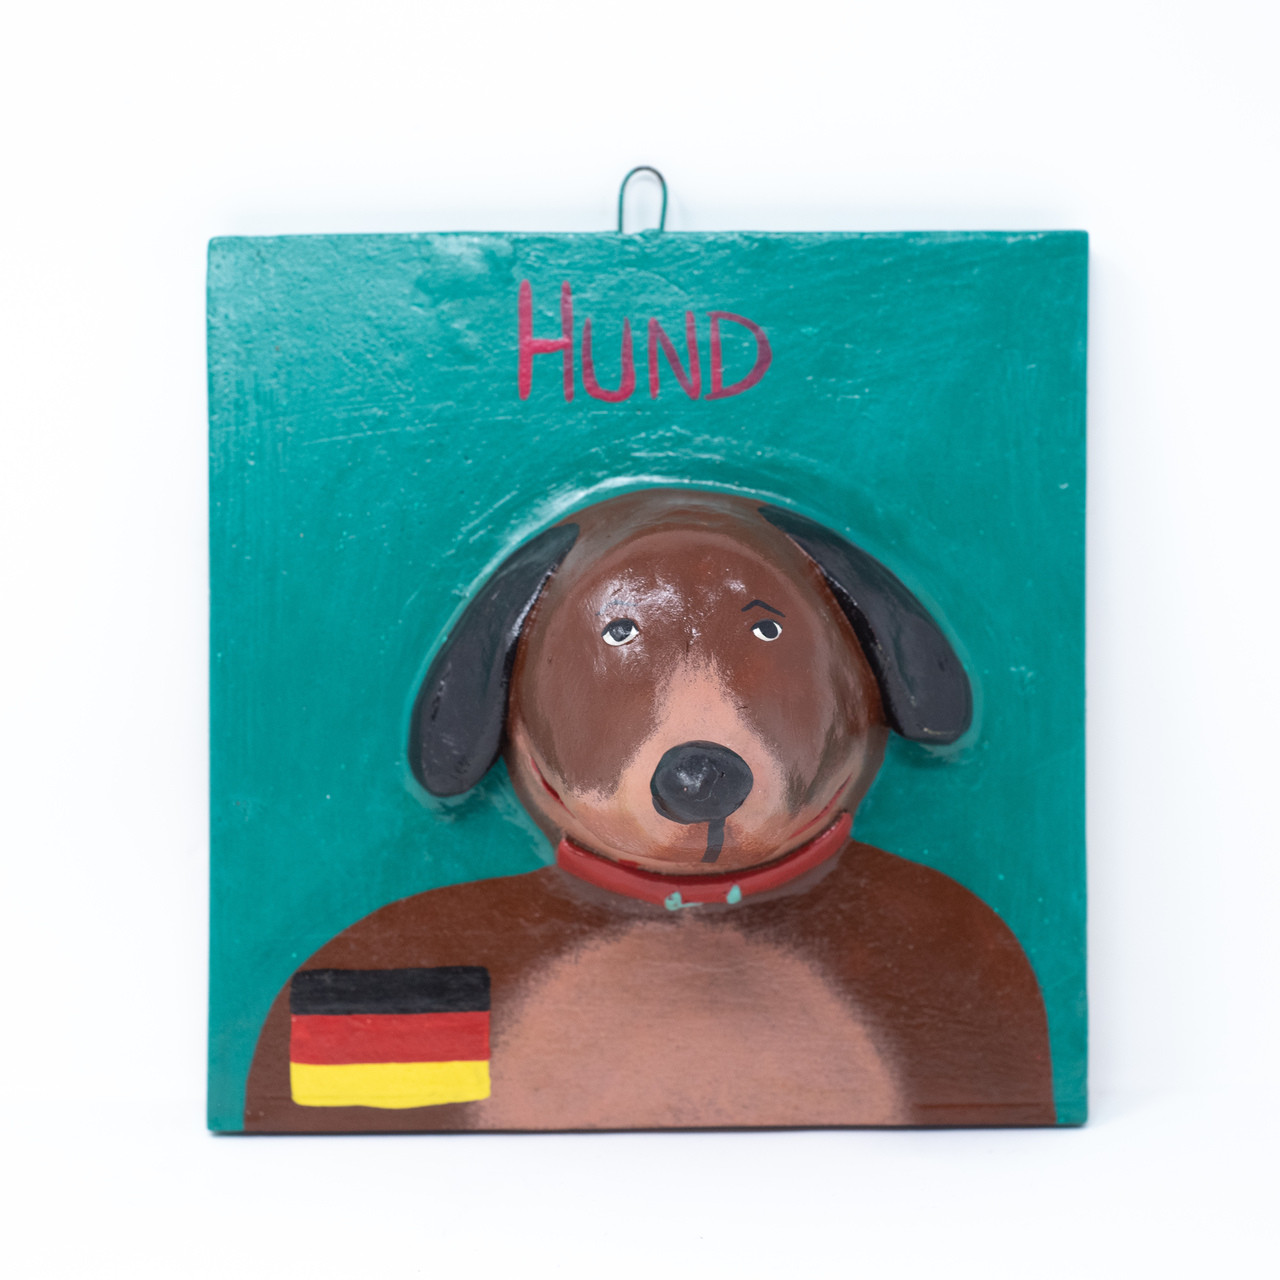 German, Germany, Dog, Hund, Hound, One-of-a-Kind, Limited Edition, Sustainable, Eco-Friendly, Recycle, Recyclable, Handcrafted, Hanmade,